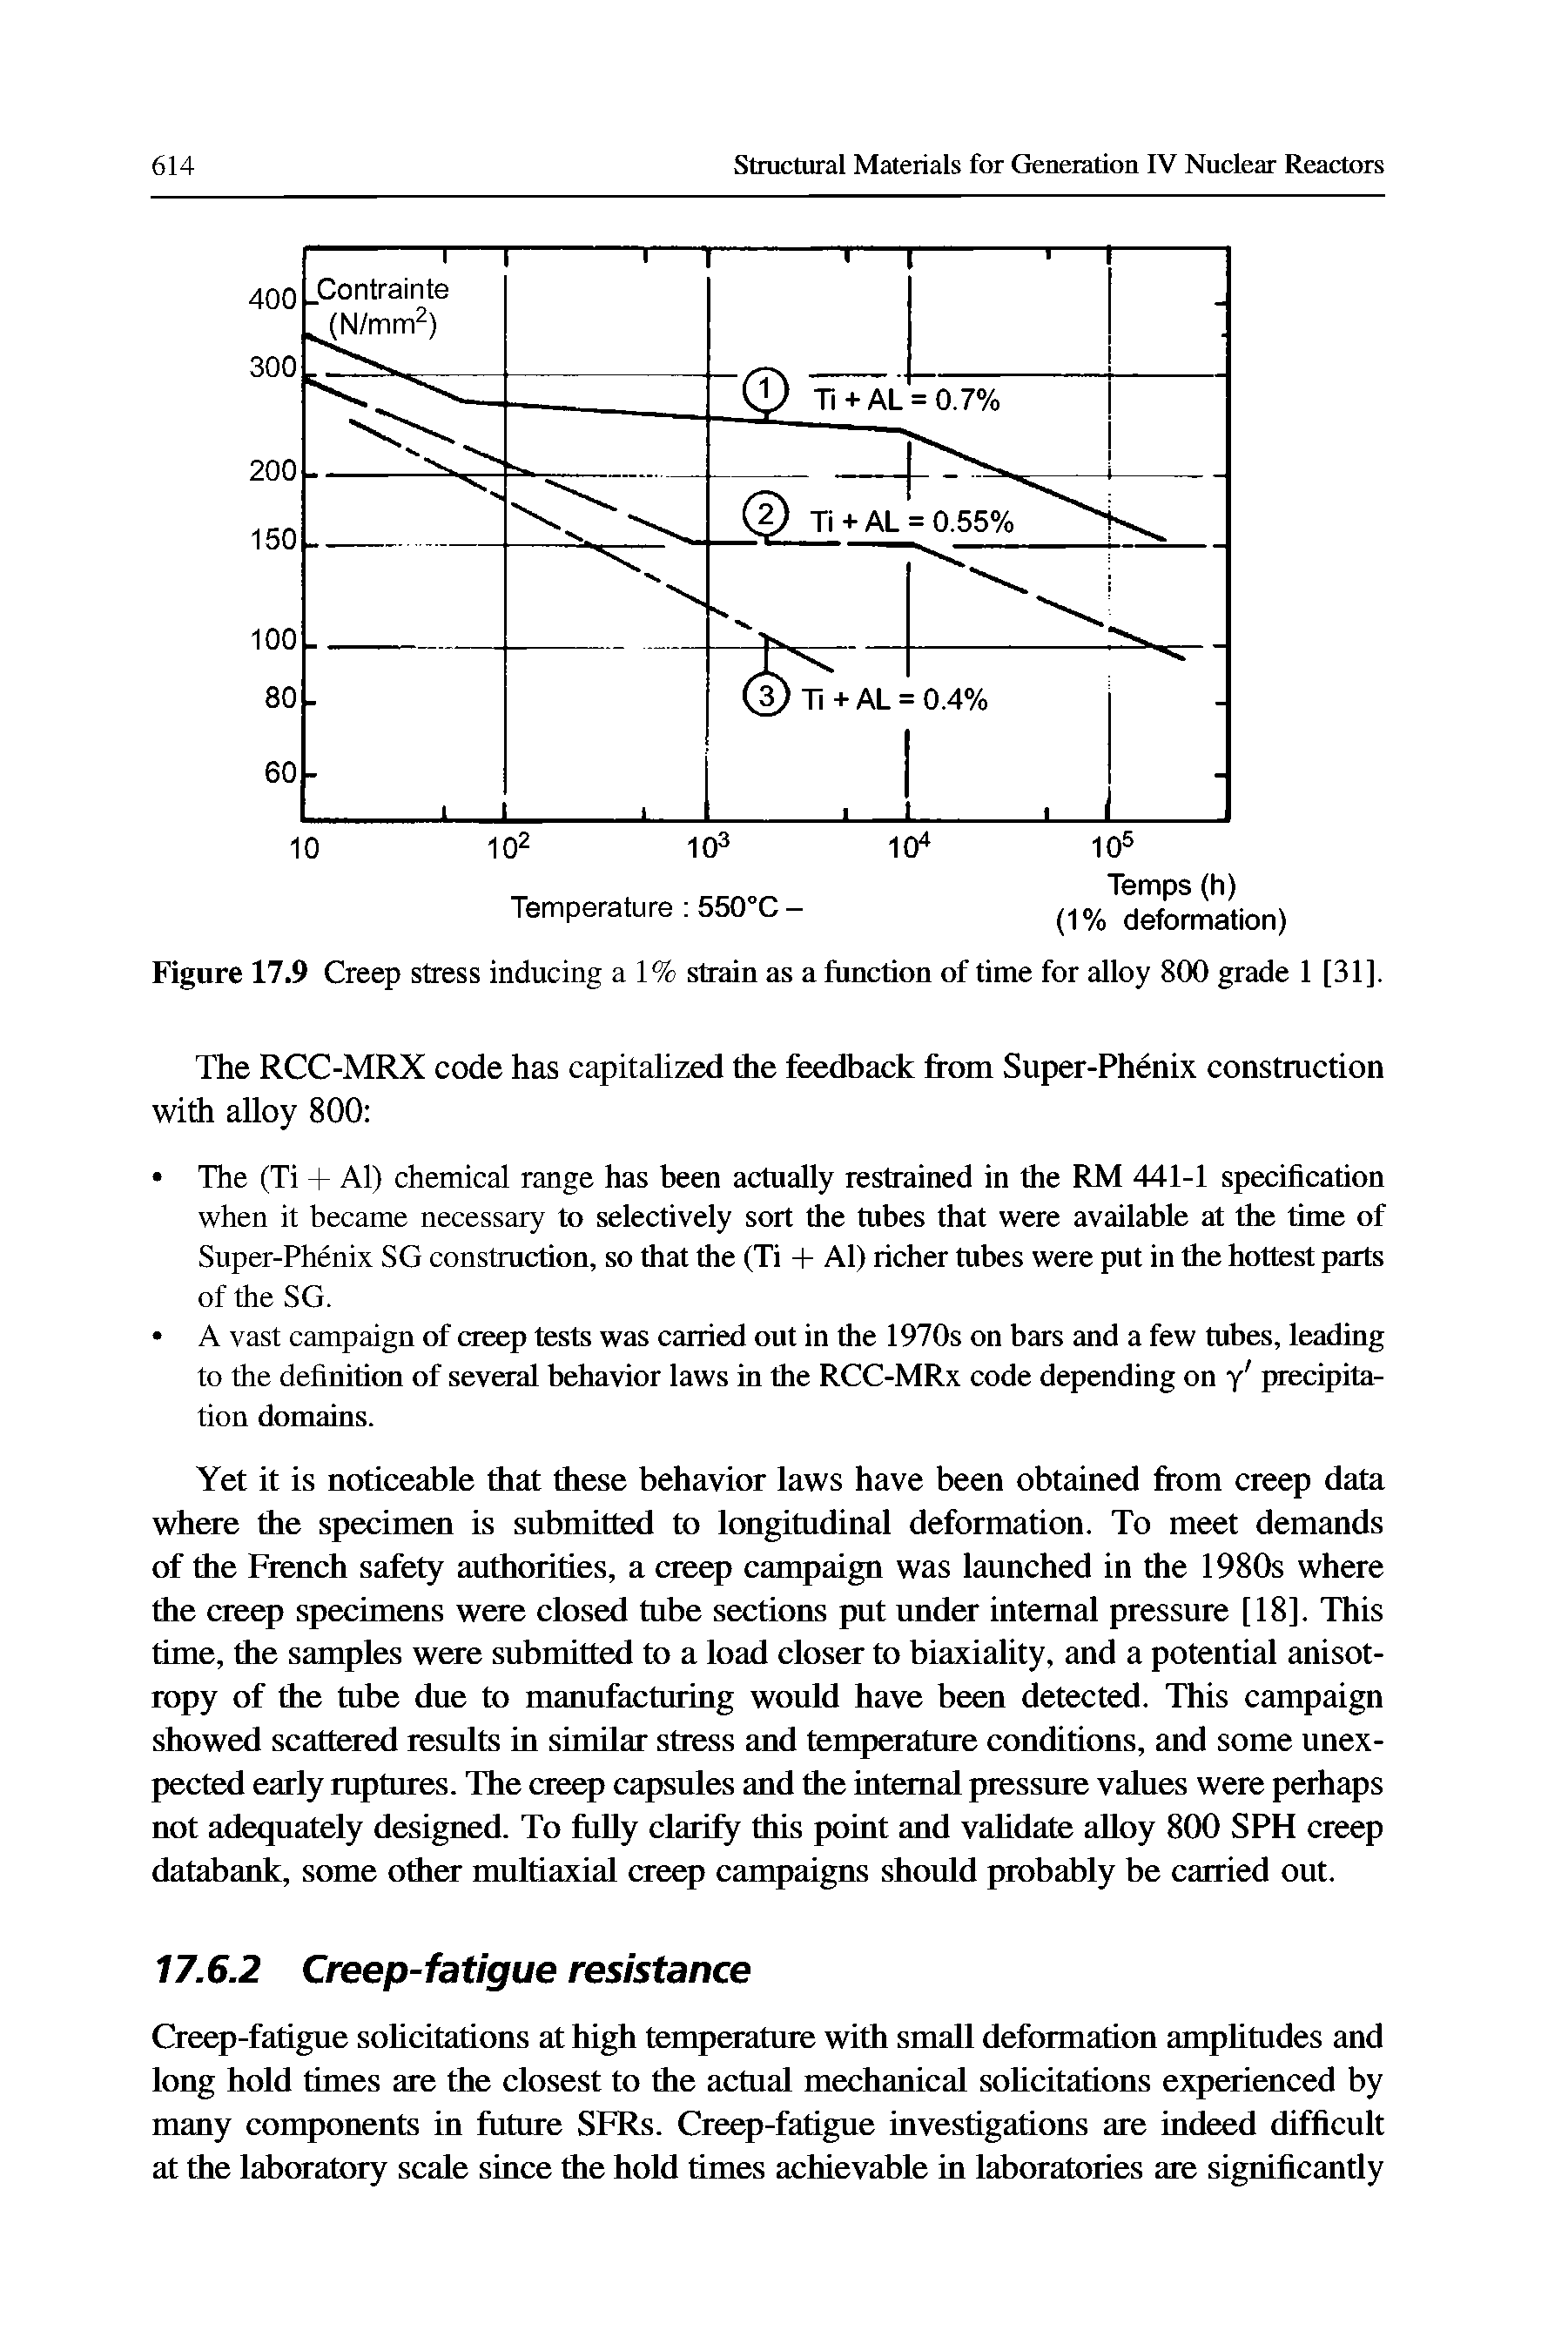 Figure 17.9 Creep stress inducing a 1% strain as a function of time for aiioy 800 grade 1 [31].